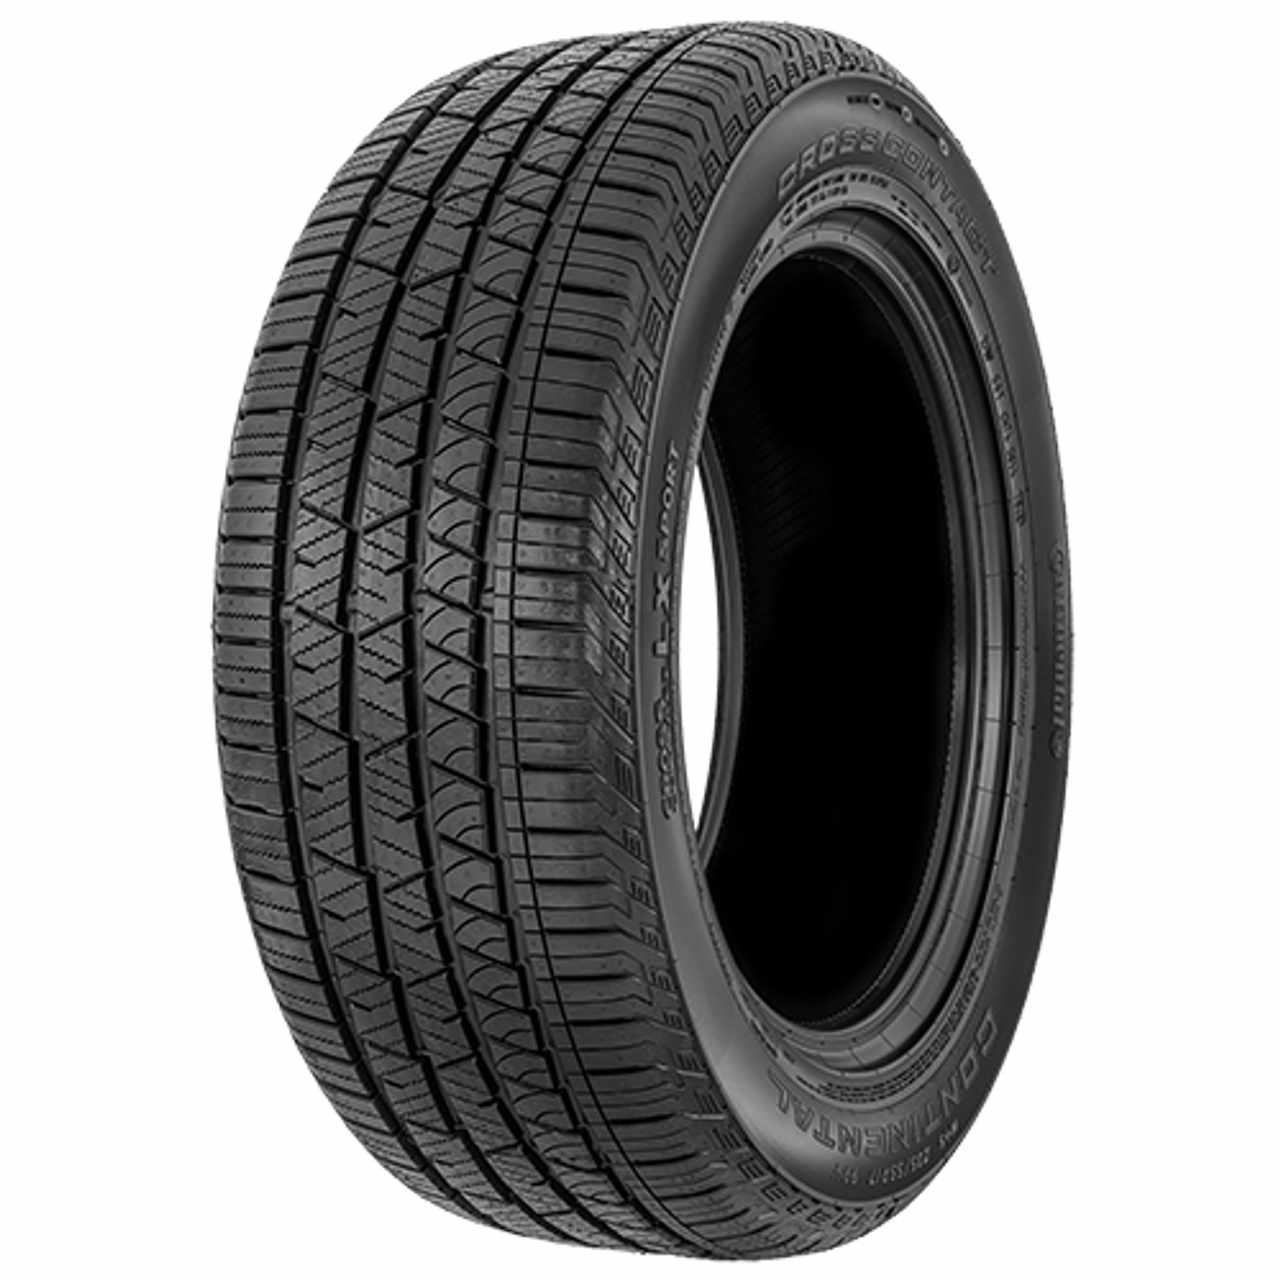 CONTINENTAL CROSSCONTACT LX SPORT (T1) (EVc) 265/45R20 108V CONTISILENT FR BSW